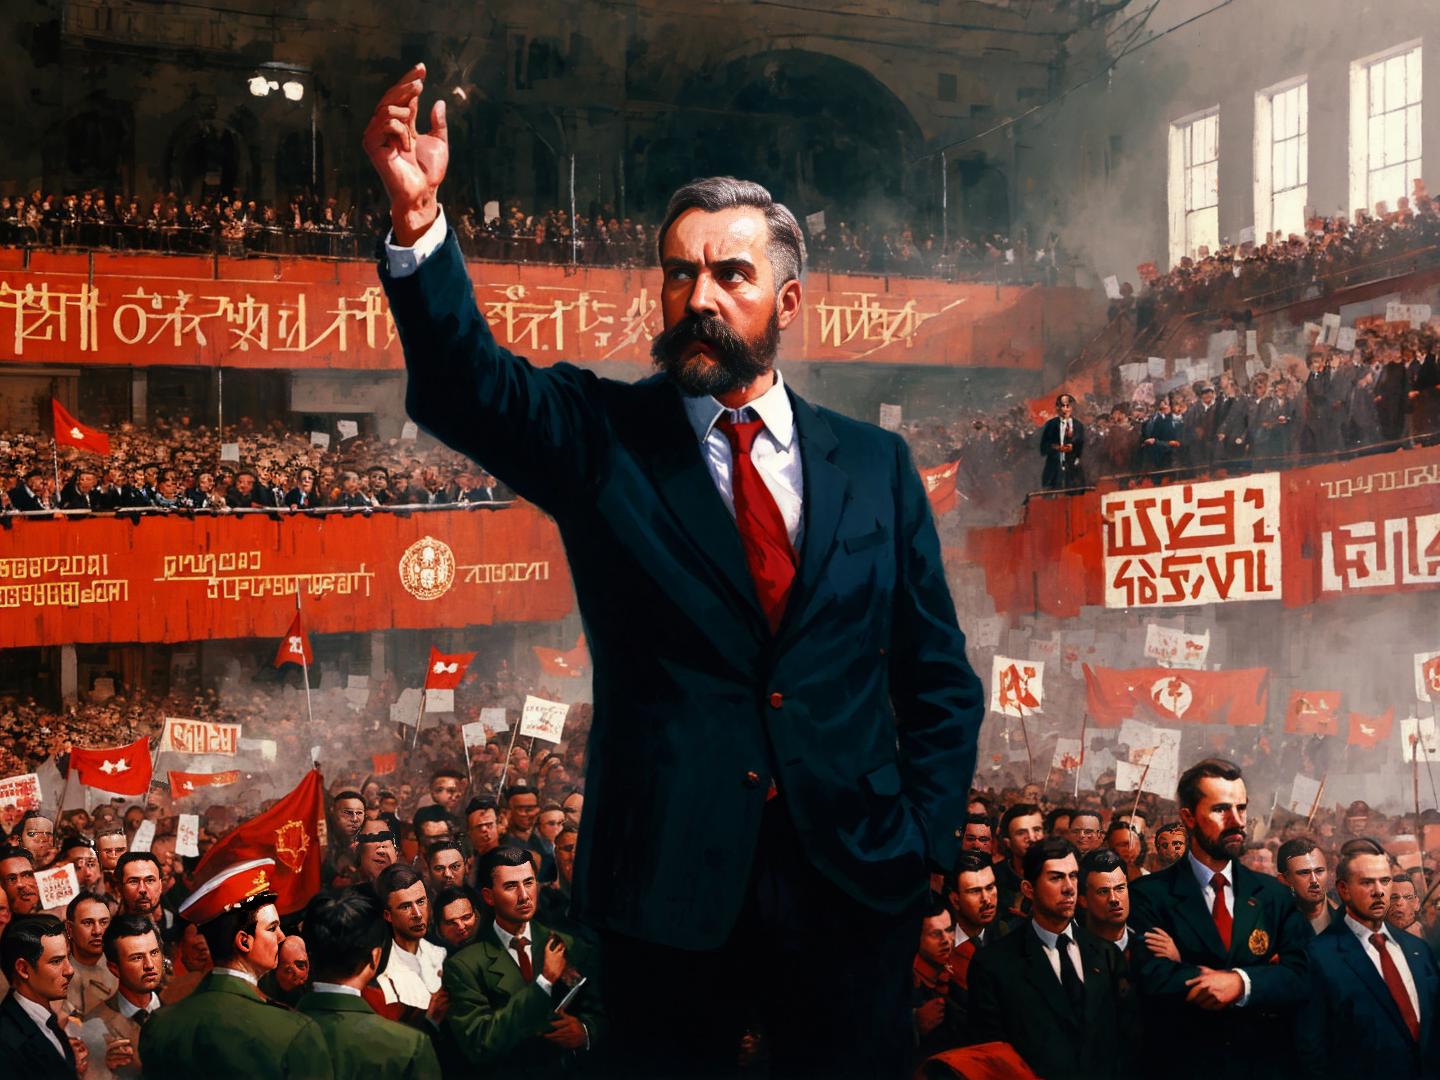 A painting of a man in a suit giving a speech to a large crowd of people.